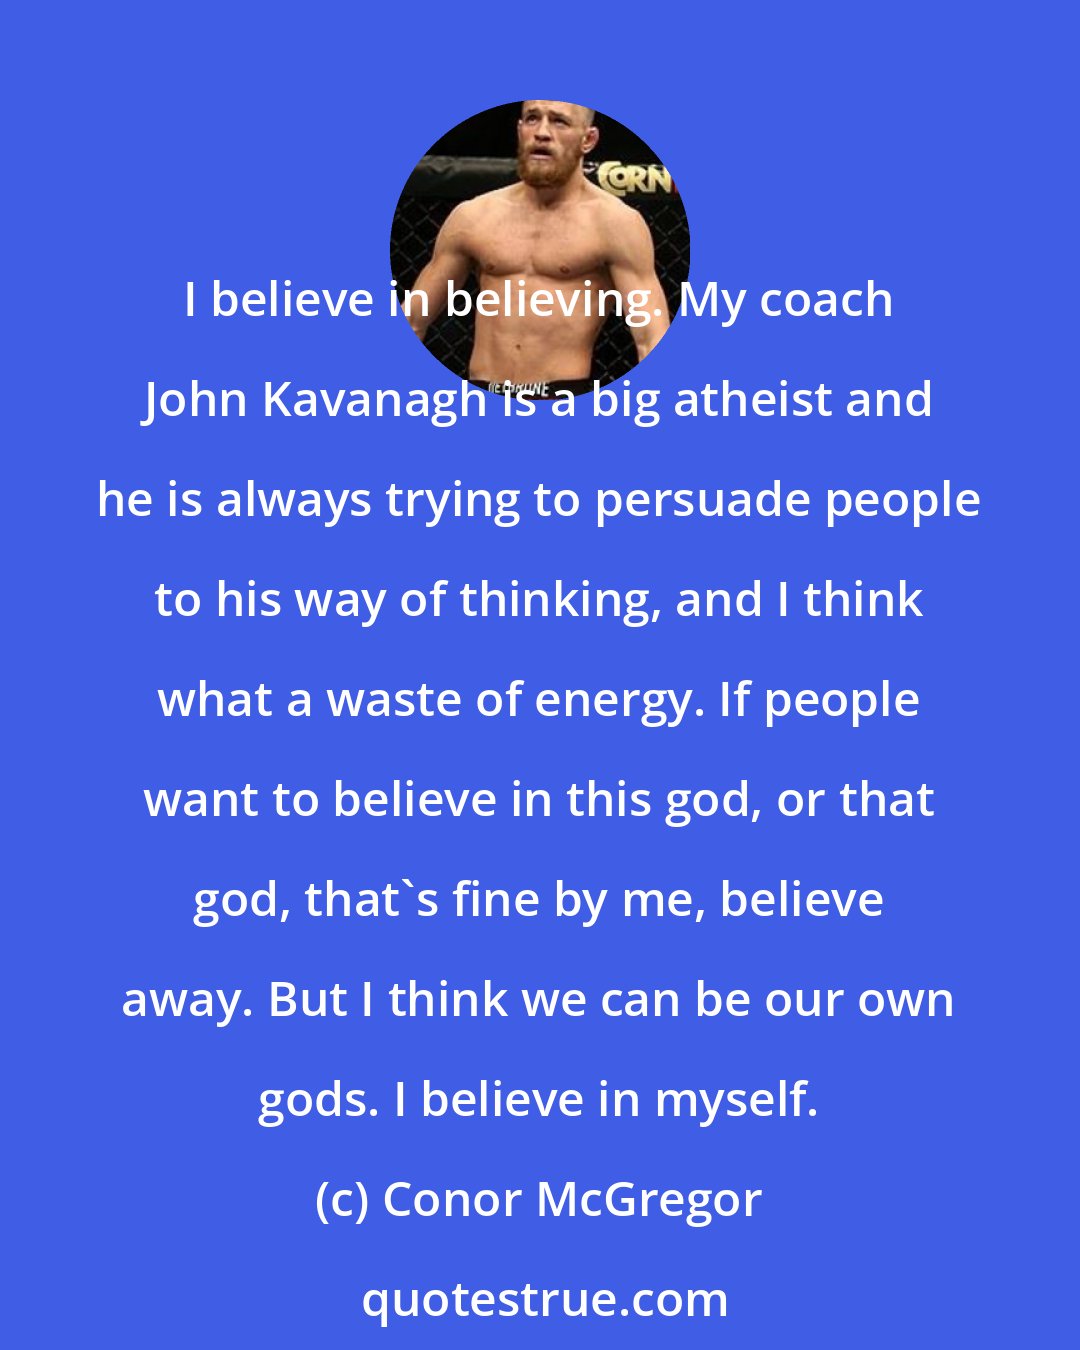 Conor McGregor: I believe in believing. My coach John Kavanagh is a big atheist and he is always trying to persuade people to his way of thinking, and I think what a waste of energy. If people want to believe in this god, or that god, that's fine by me, believe away. But I think we can be our own gods. I believe in myself.